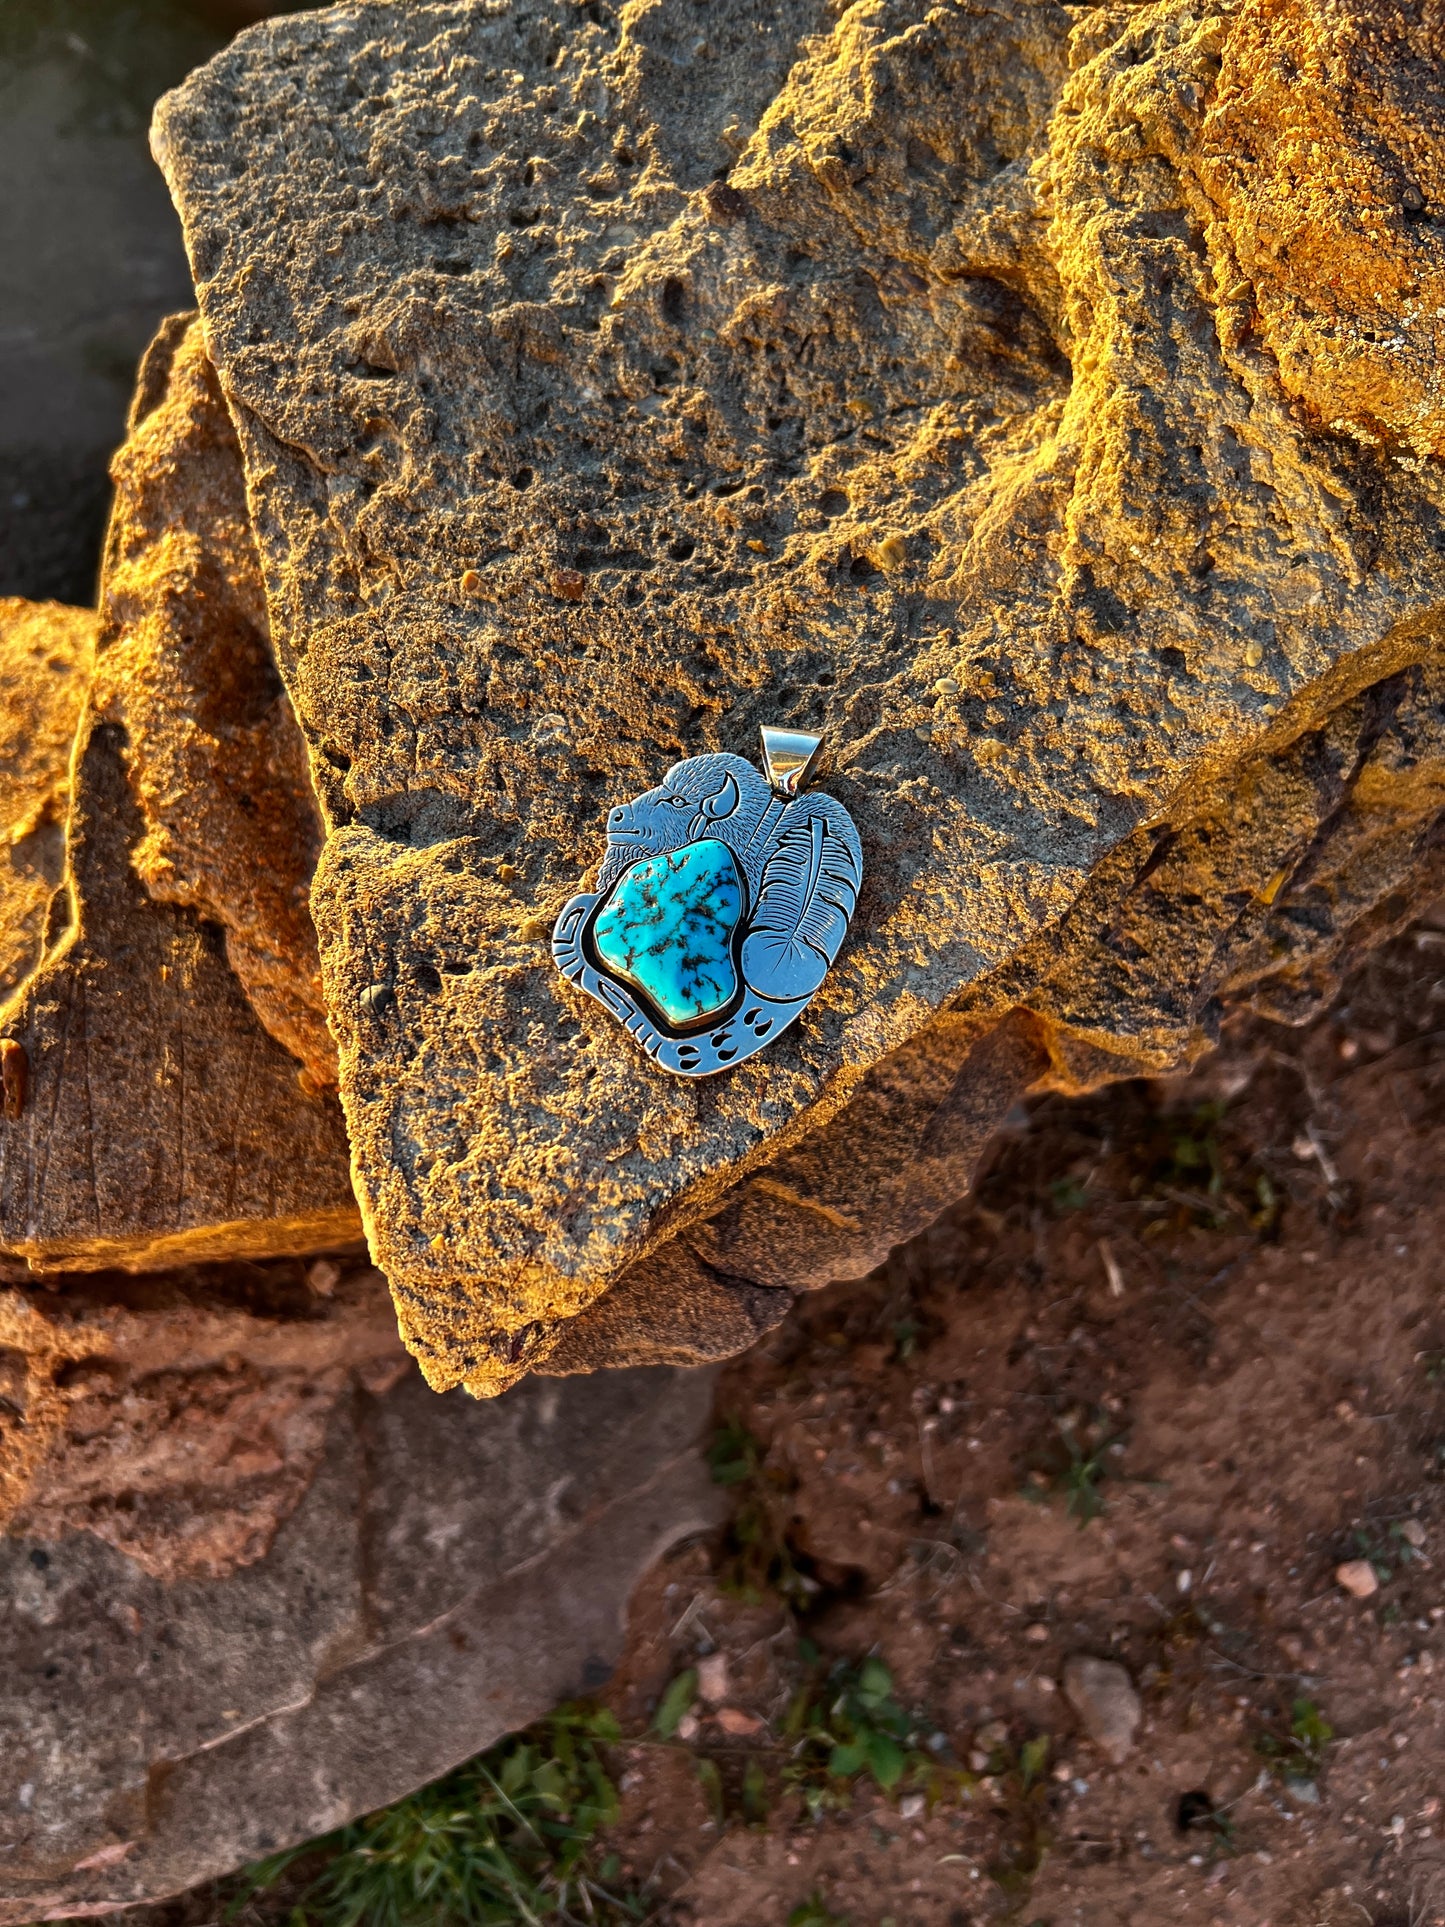 Turquoise Buffalo Pendant from the Rodgers Estate Collection